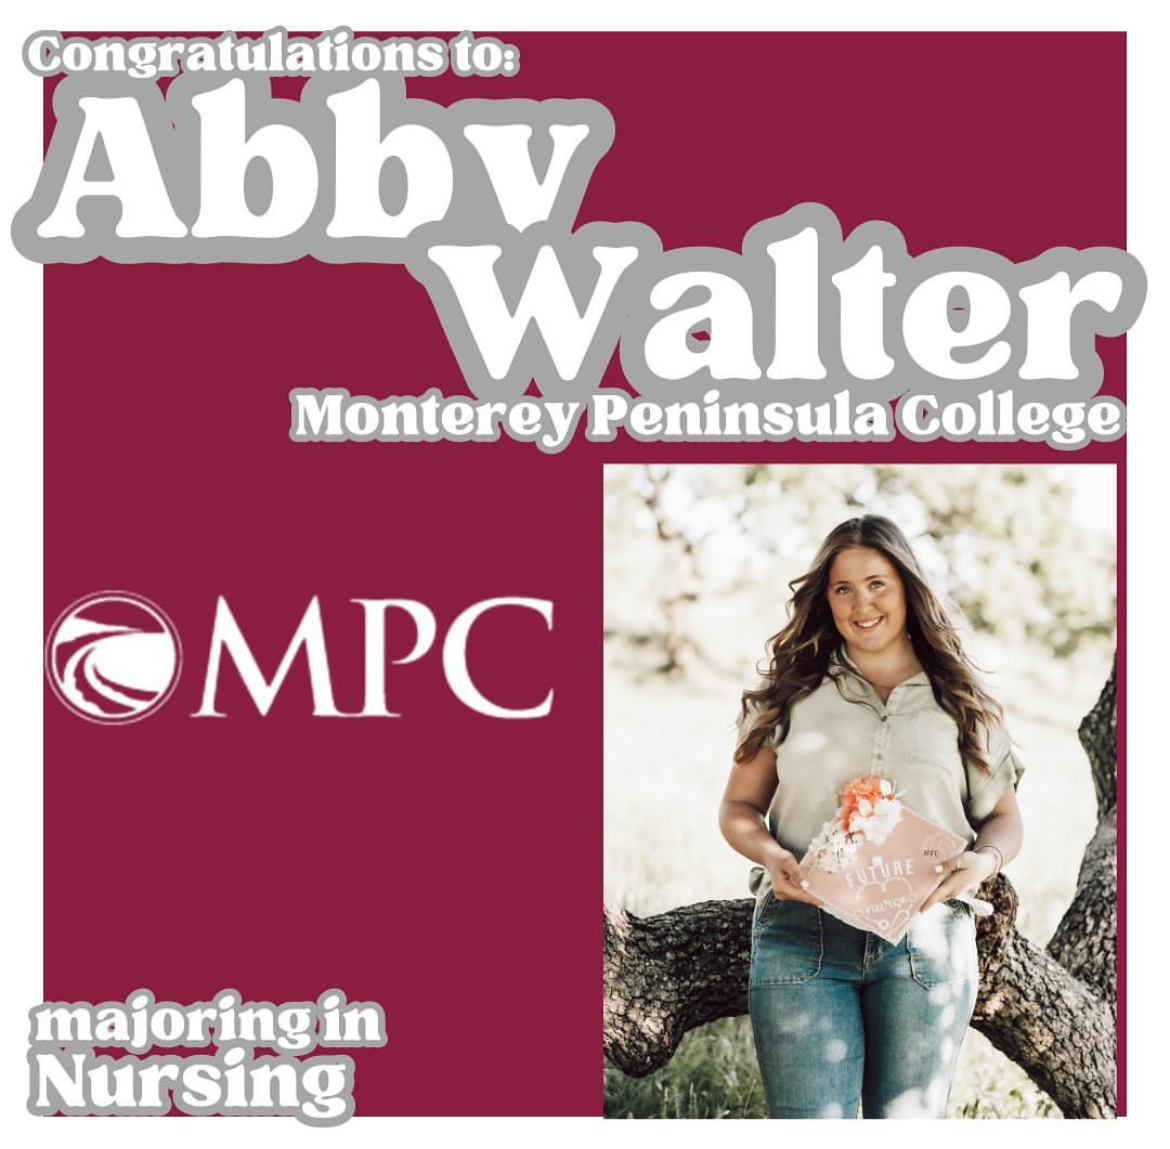 As we continue to celebrate the post-high school plans of Hollister High School seniors, we are proud to announce that Abby Walter will attend Monterey Peninsula College in the Fall, majoring in nursing and playing volleyball.